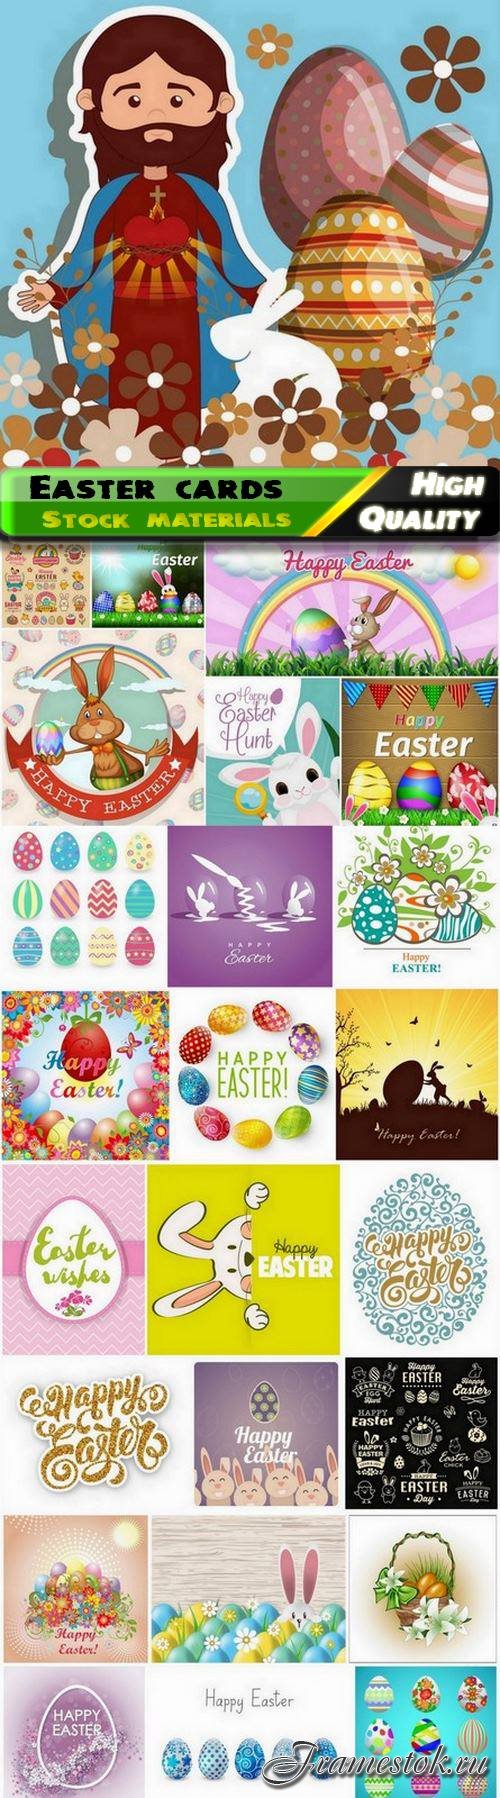 Holiday ecards for easter with eggs and rabbit 2 - 25 Eps